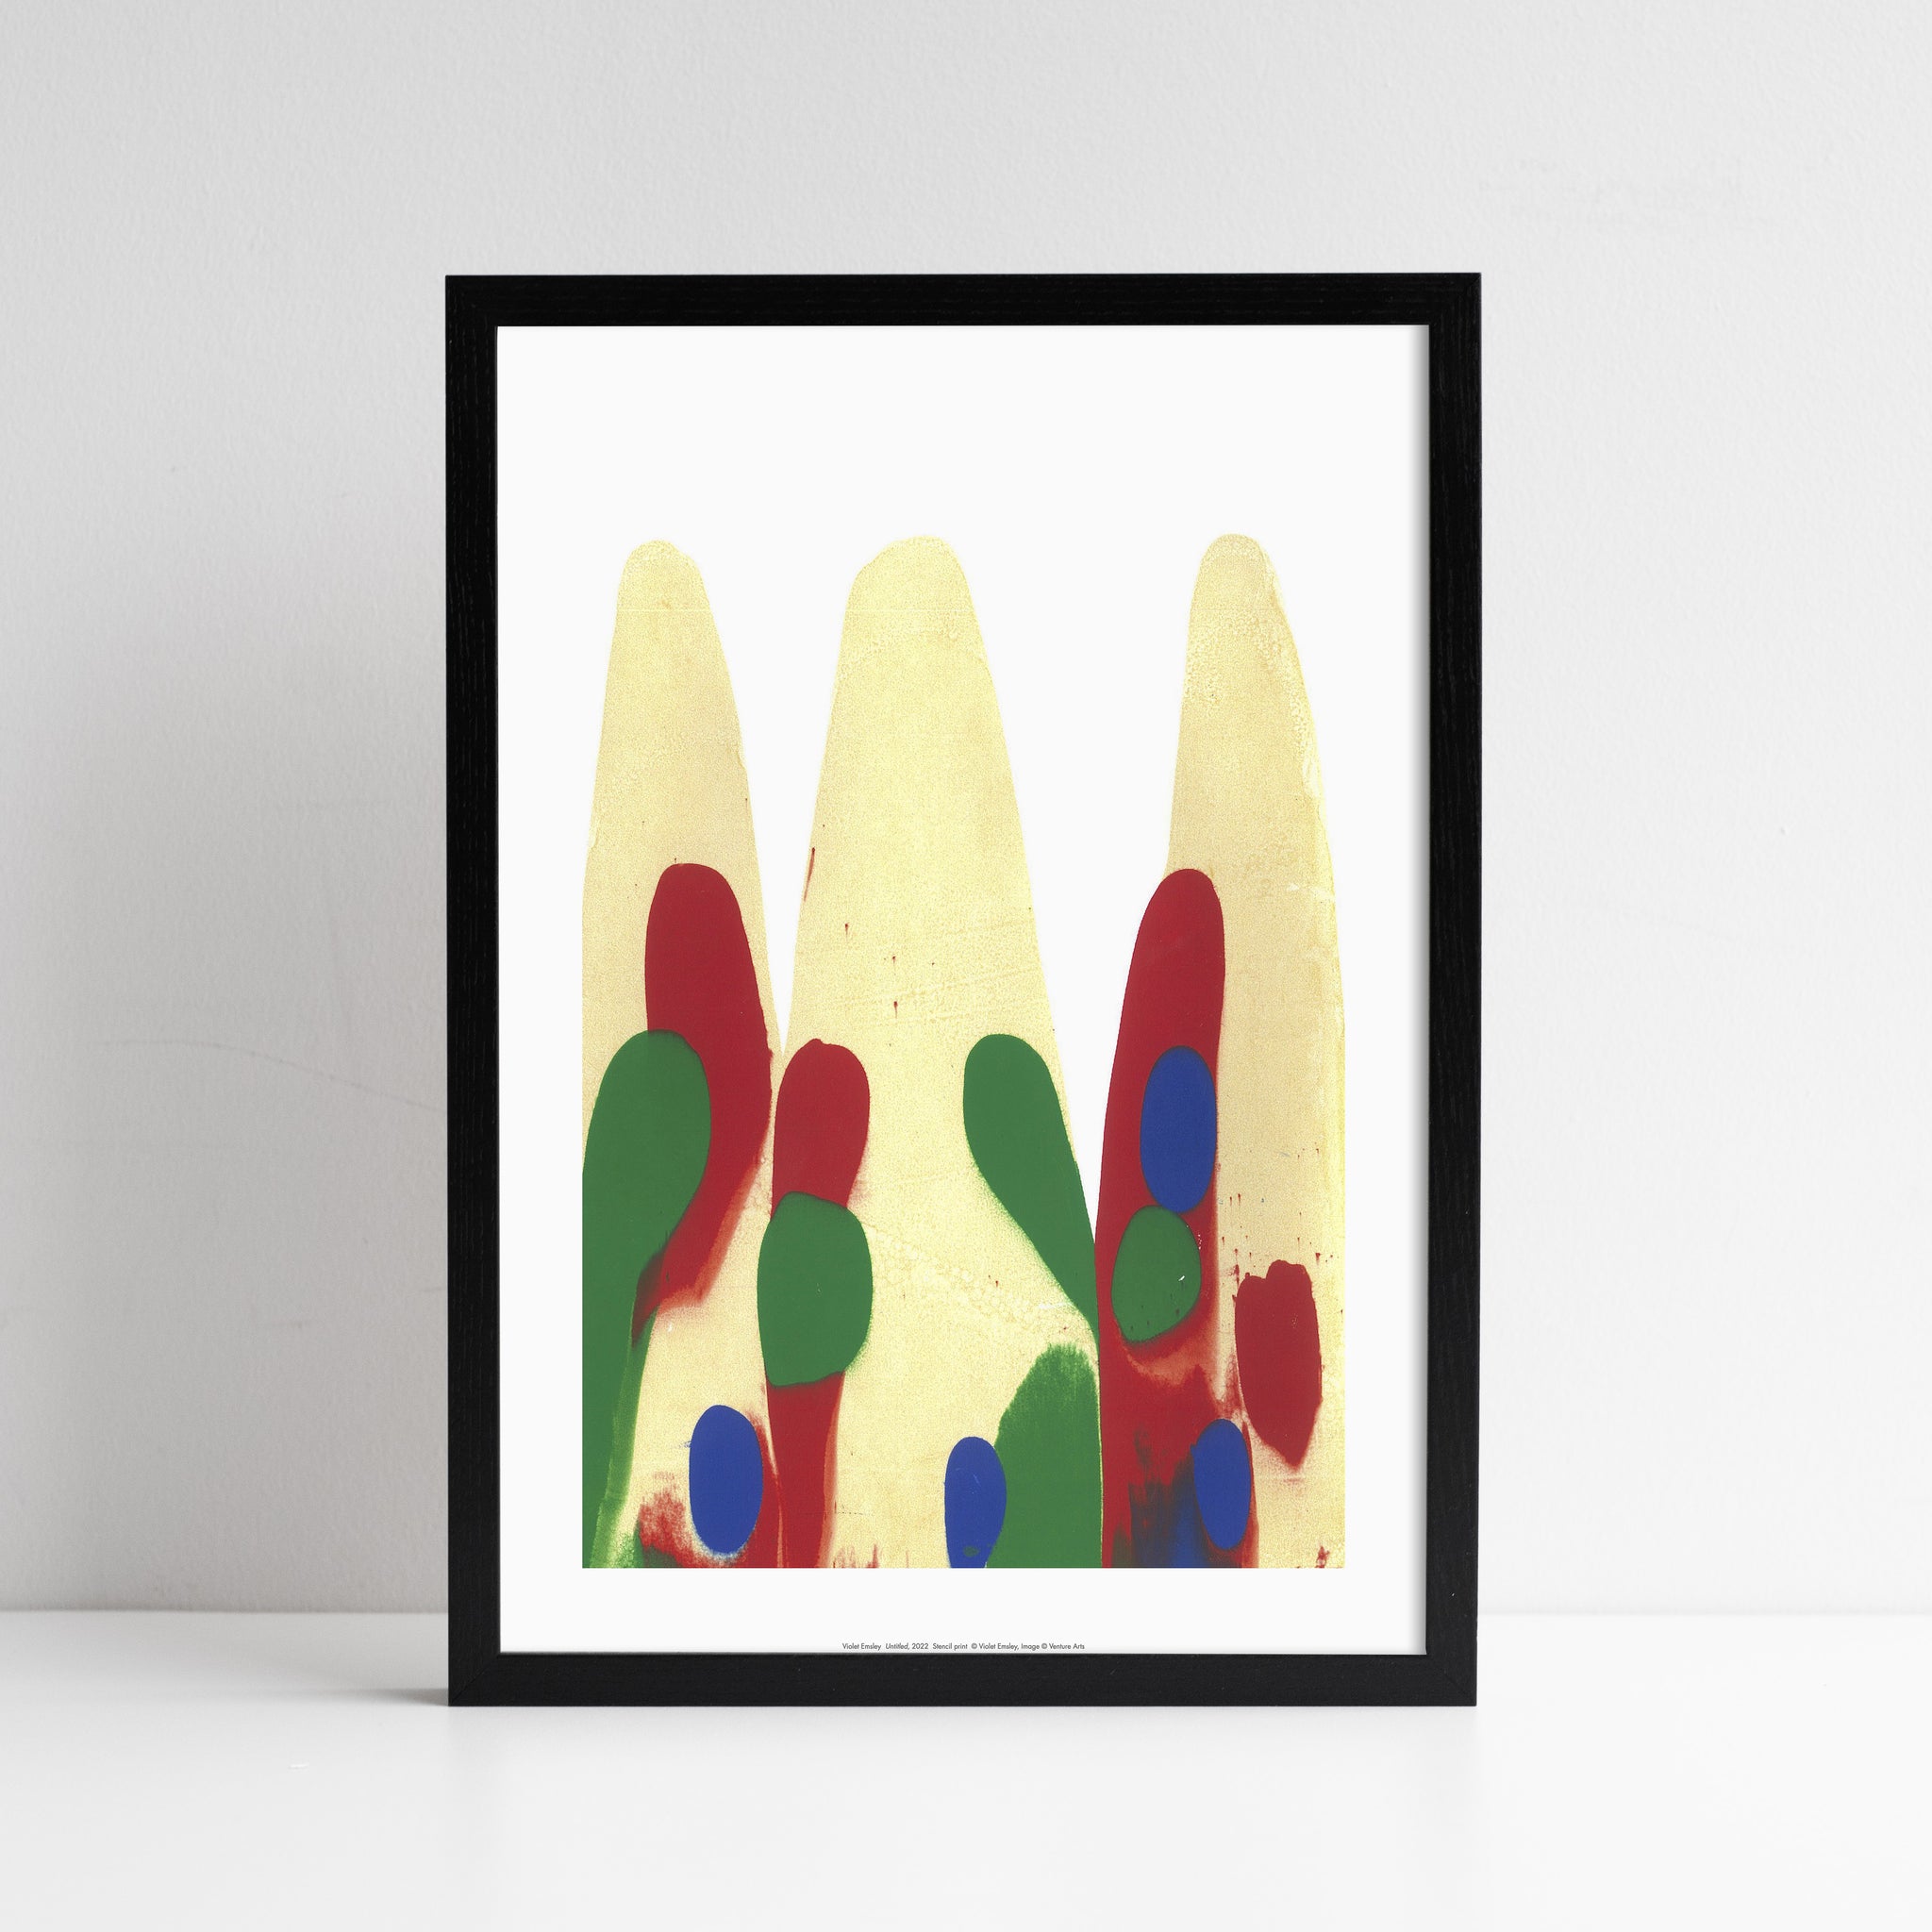 Reproduction of an artwork by Violet Emsley - abstract colourful shapes. Placed in a black frame.